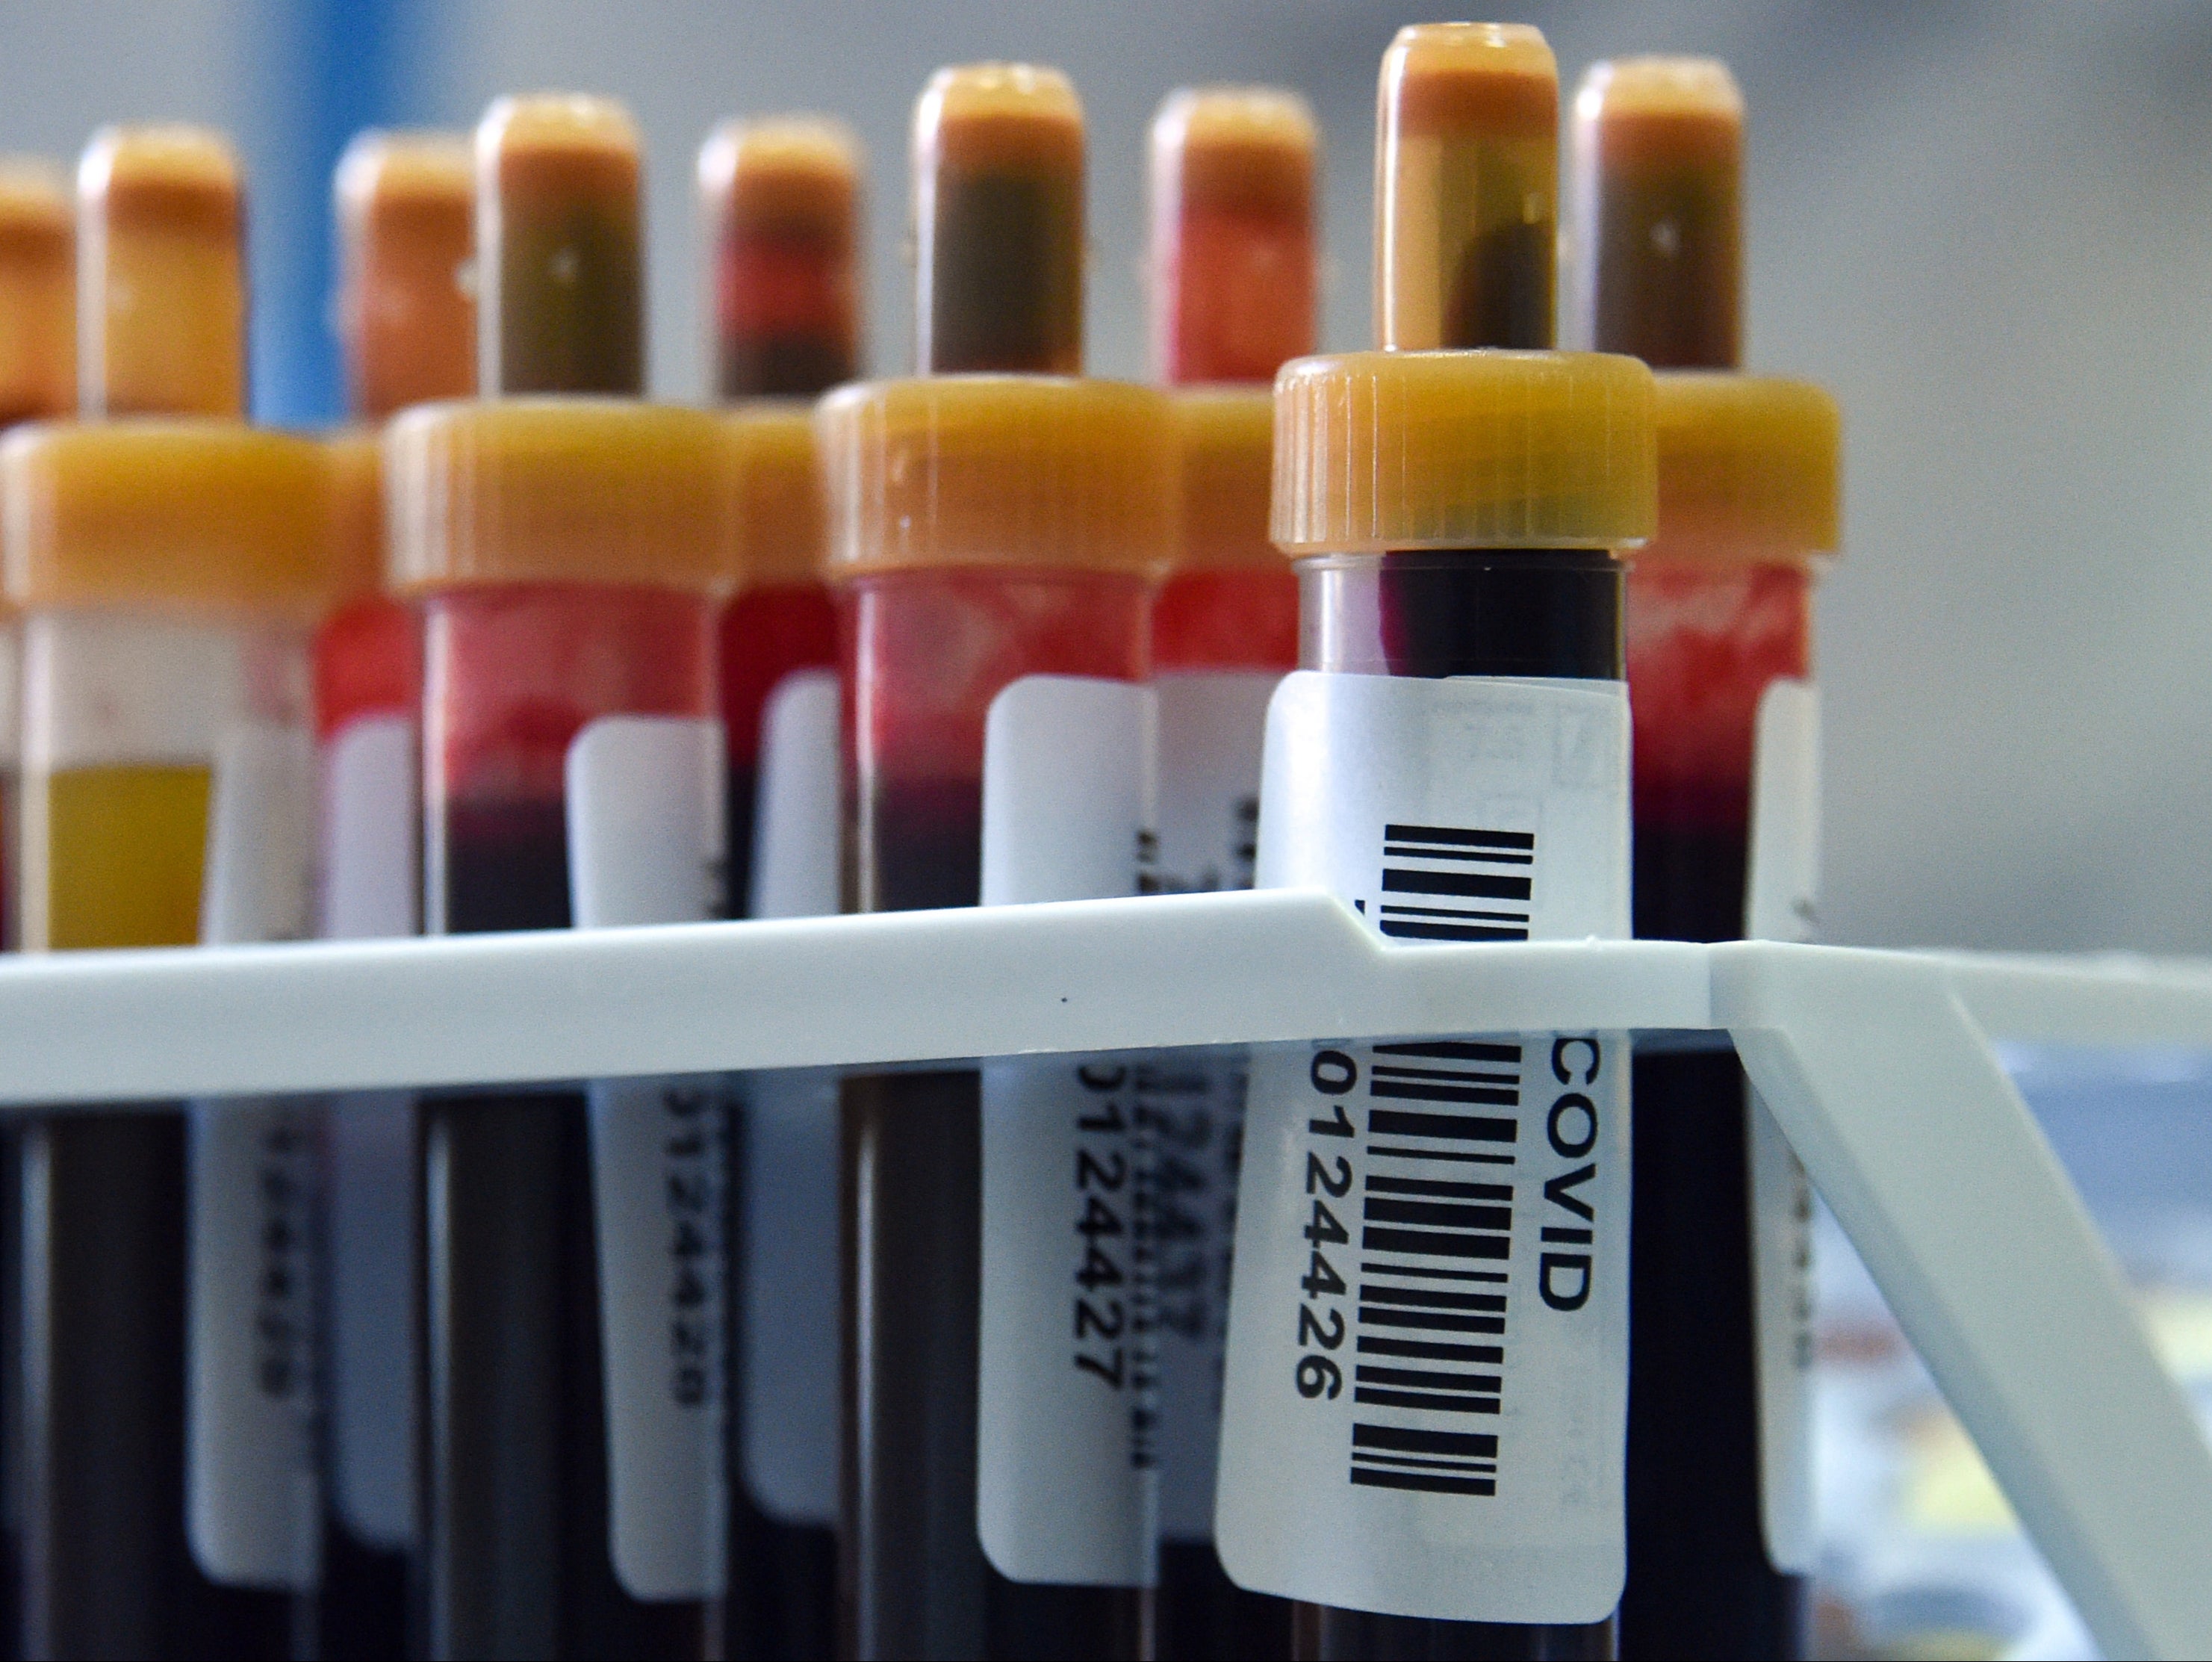 Blood samples lined up to test for Covid-19 antibodies